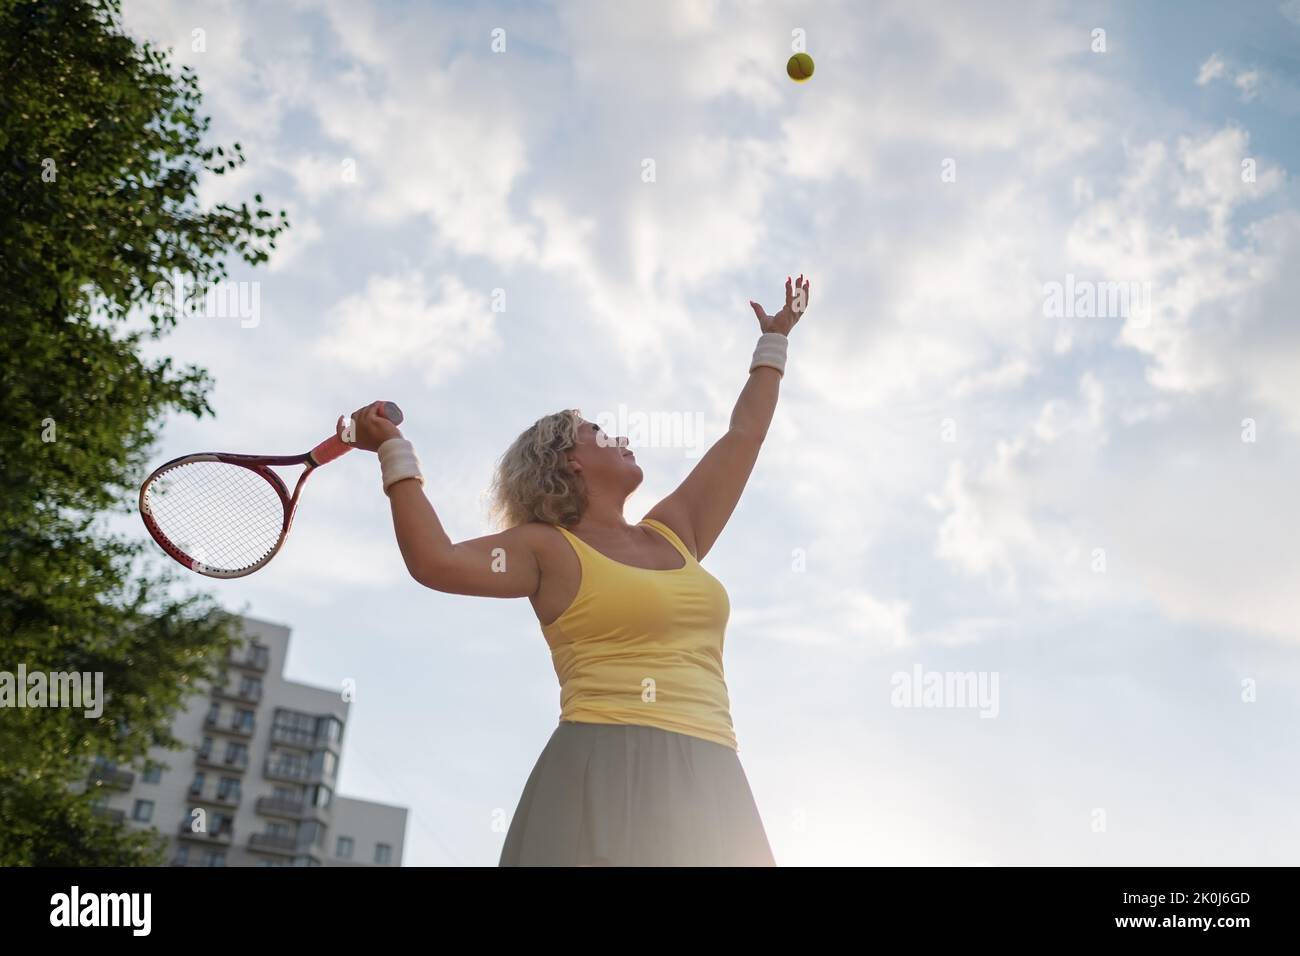 Just serve it. Shot of a mature woman playing tennis outside. Stock Photo